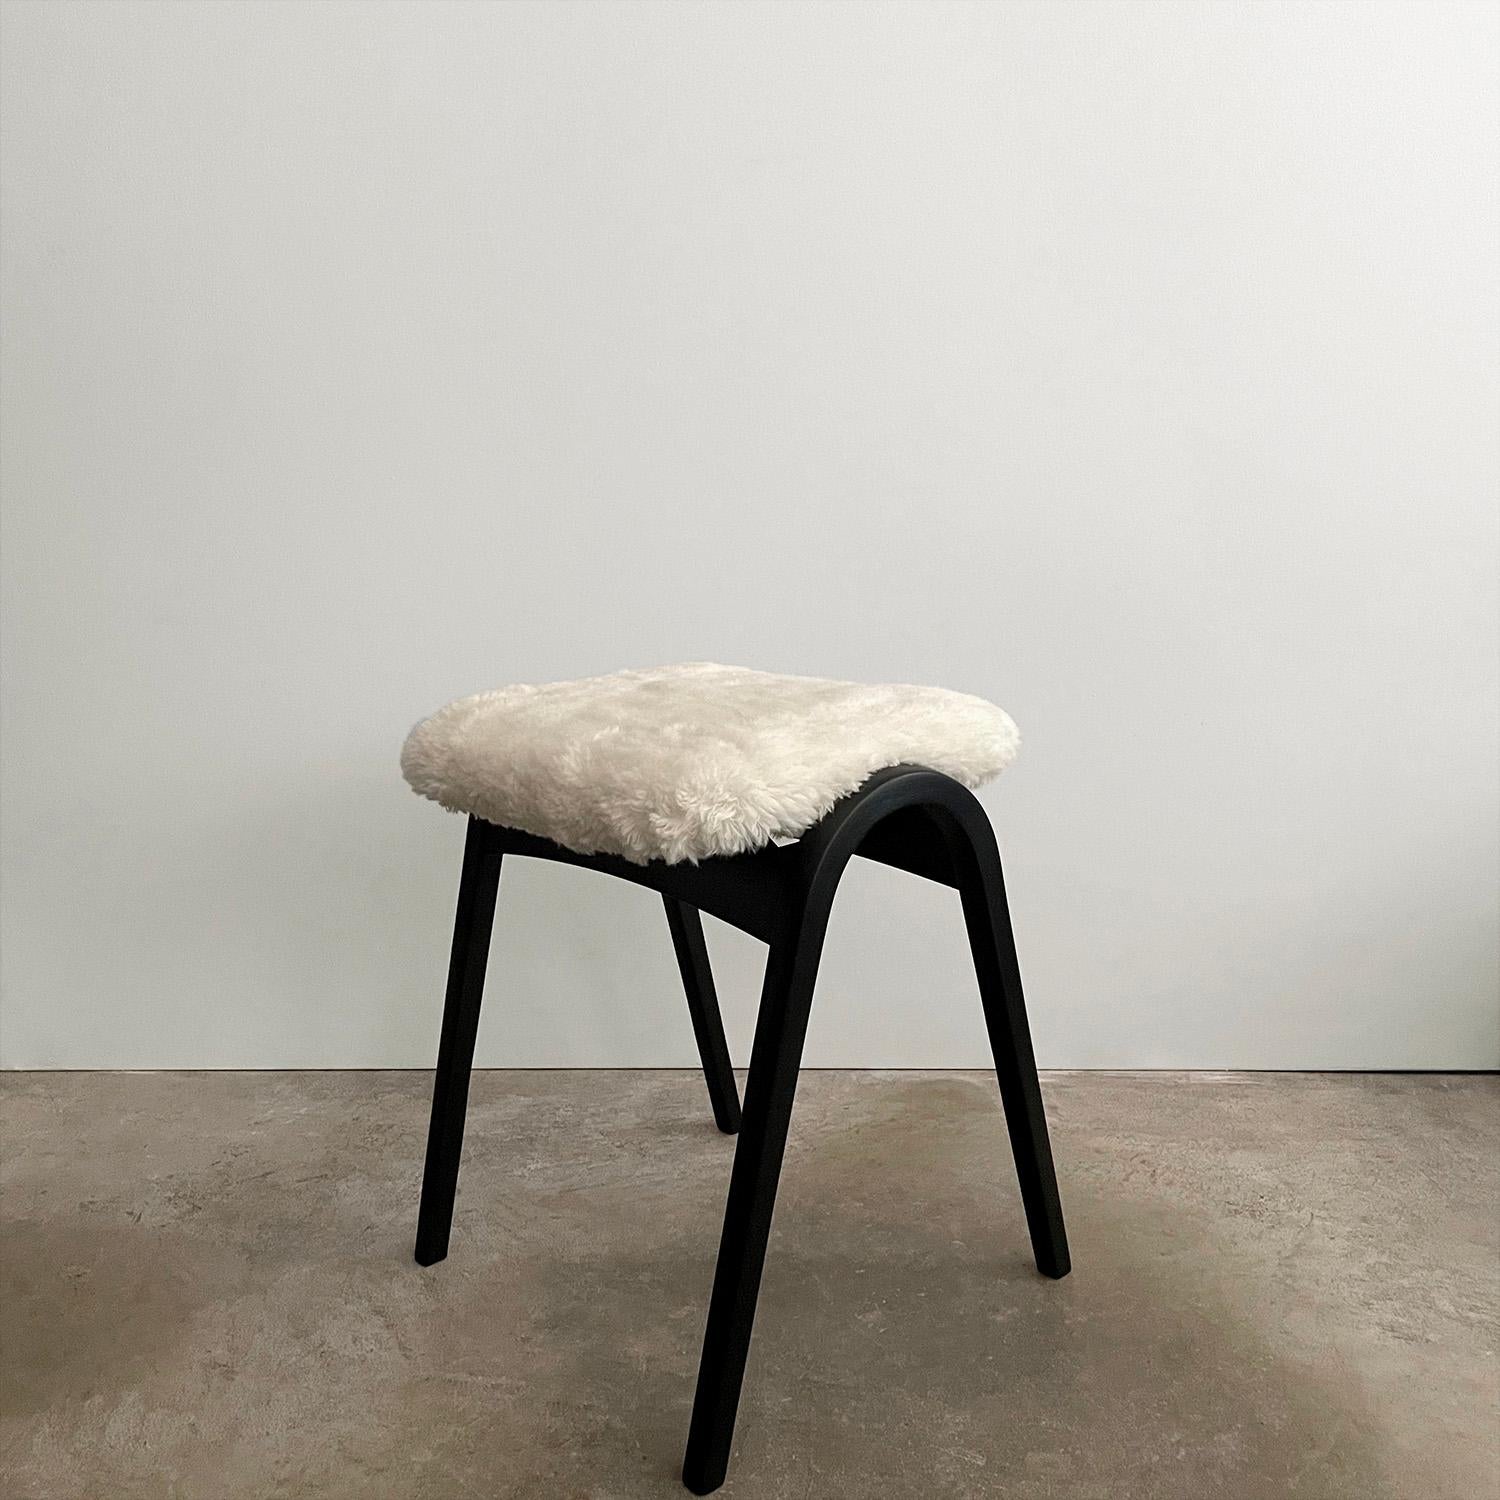 Isamu Kenmochi Japanese Bentwood & Italian Boucle Stool 
Japan, circa 1960s
Manufactured by Akita Mokko
Beautifully preserved, Timeless Classic
Sculpted bentwood beech base has been newly refinished in matte black
Seat has been reupholstered in wool